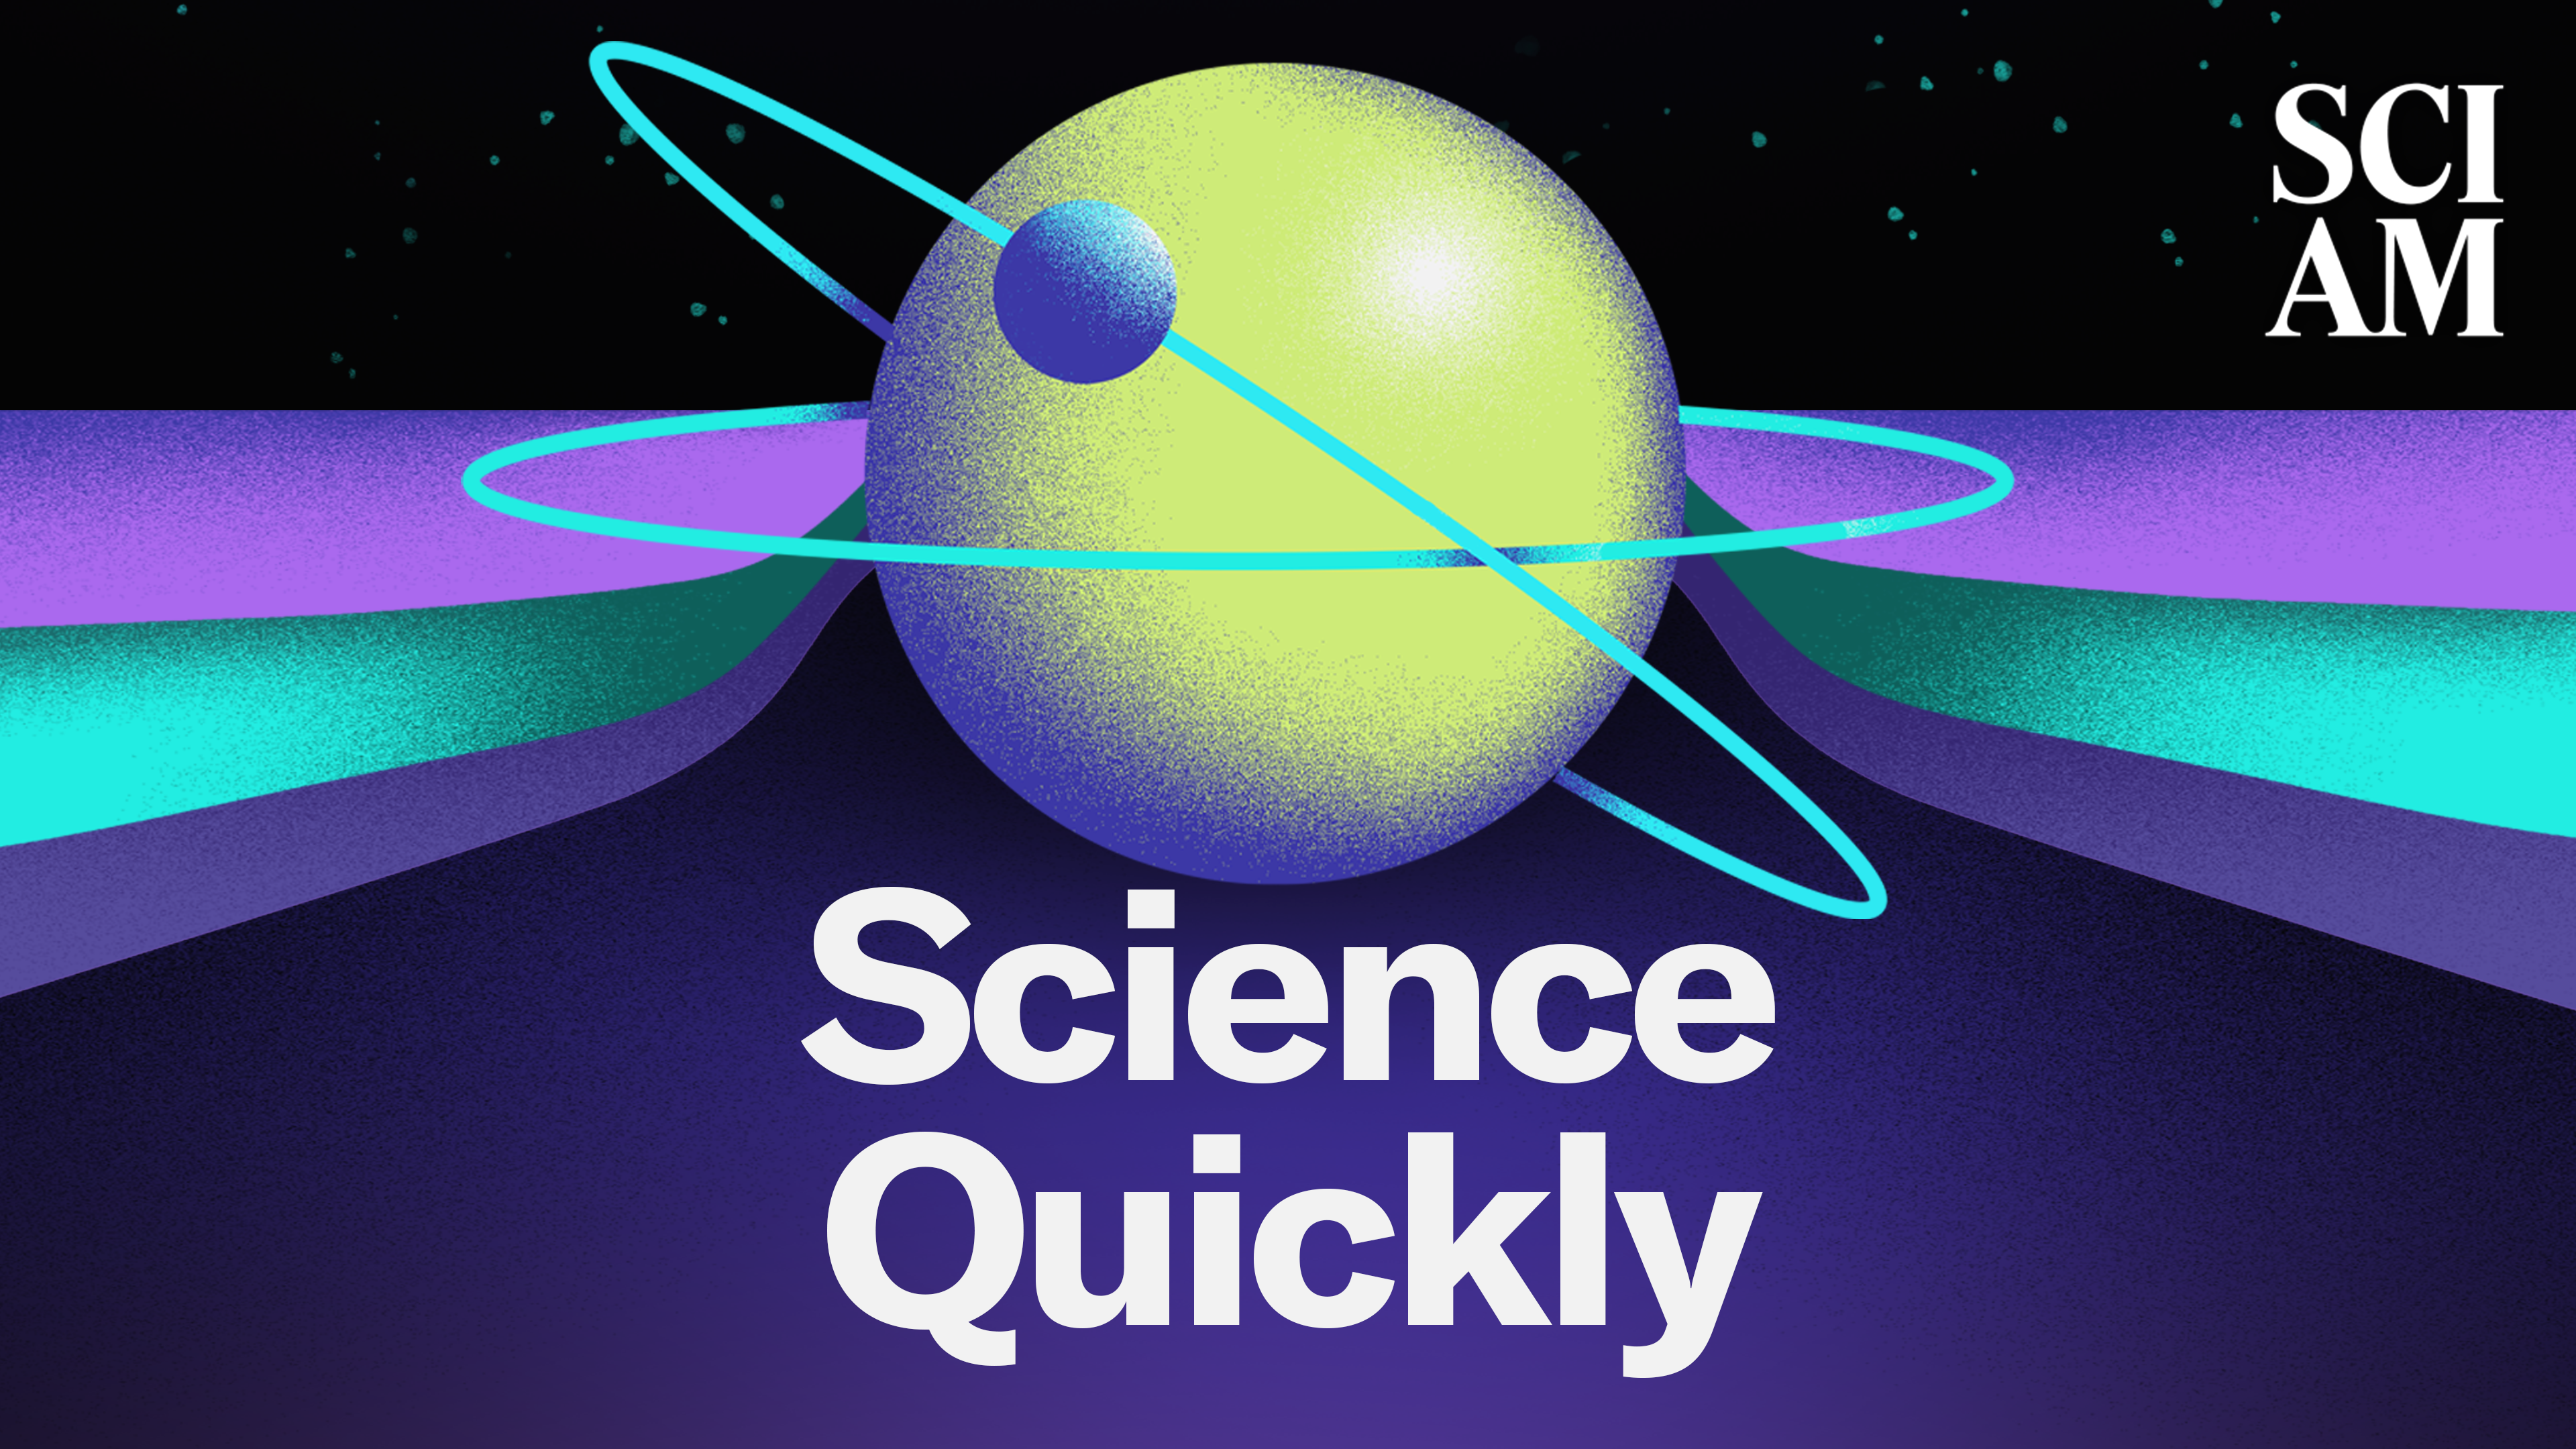 A small blue sphere orbits a larger blue sphere on a purple and blue background, with "Science Quickly" written below.